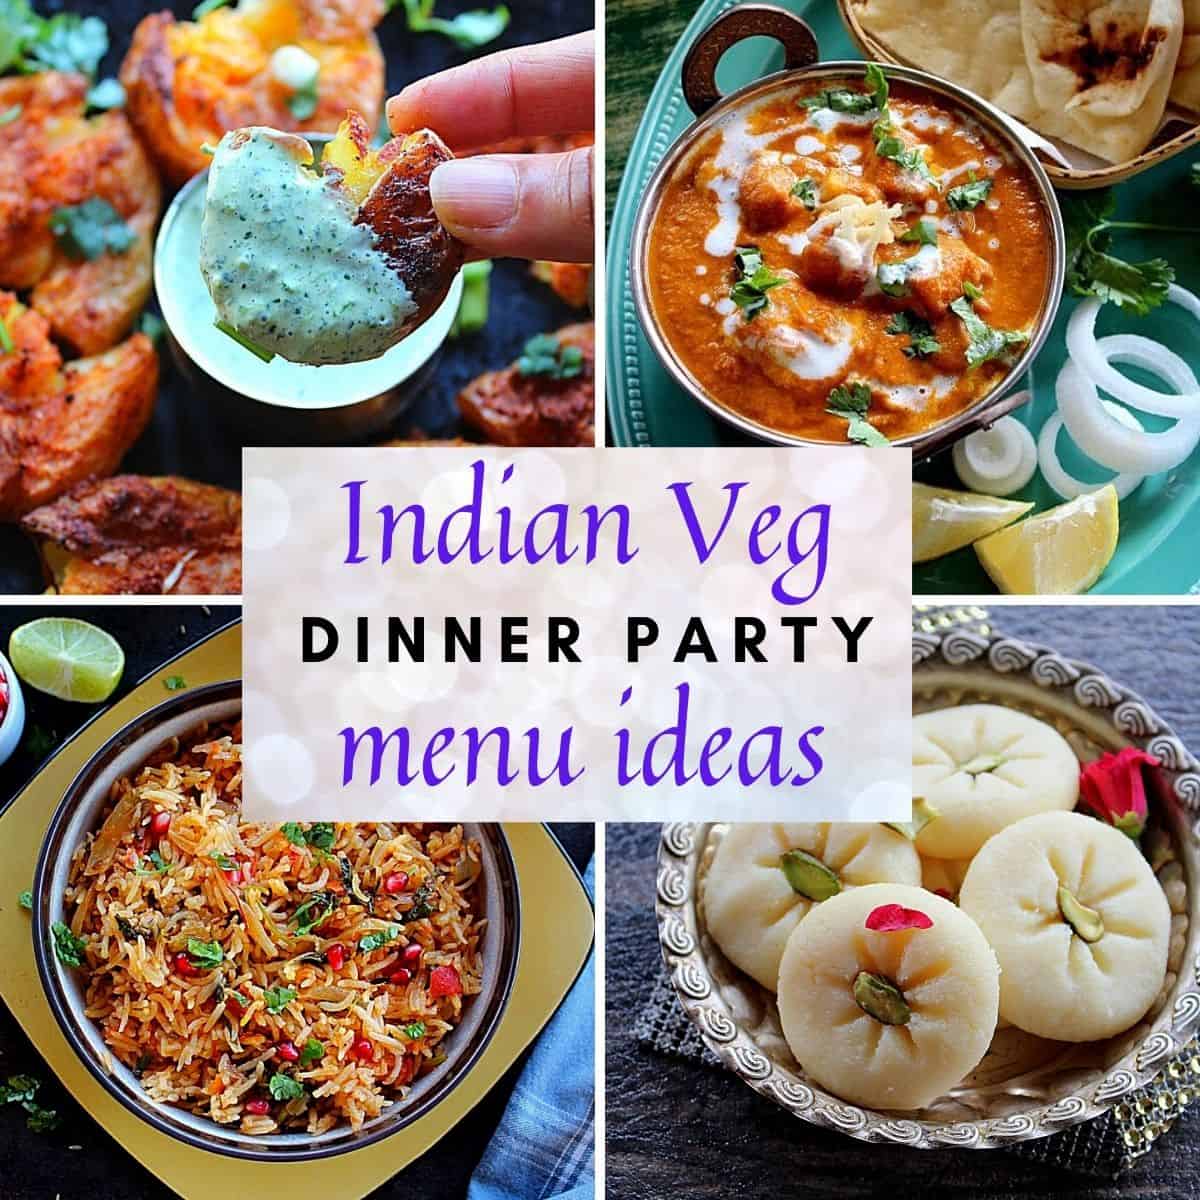 Indian Vegetarian Party Food Ideas | Deporecipe.co